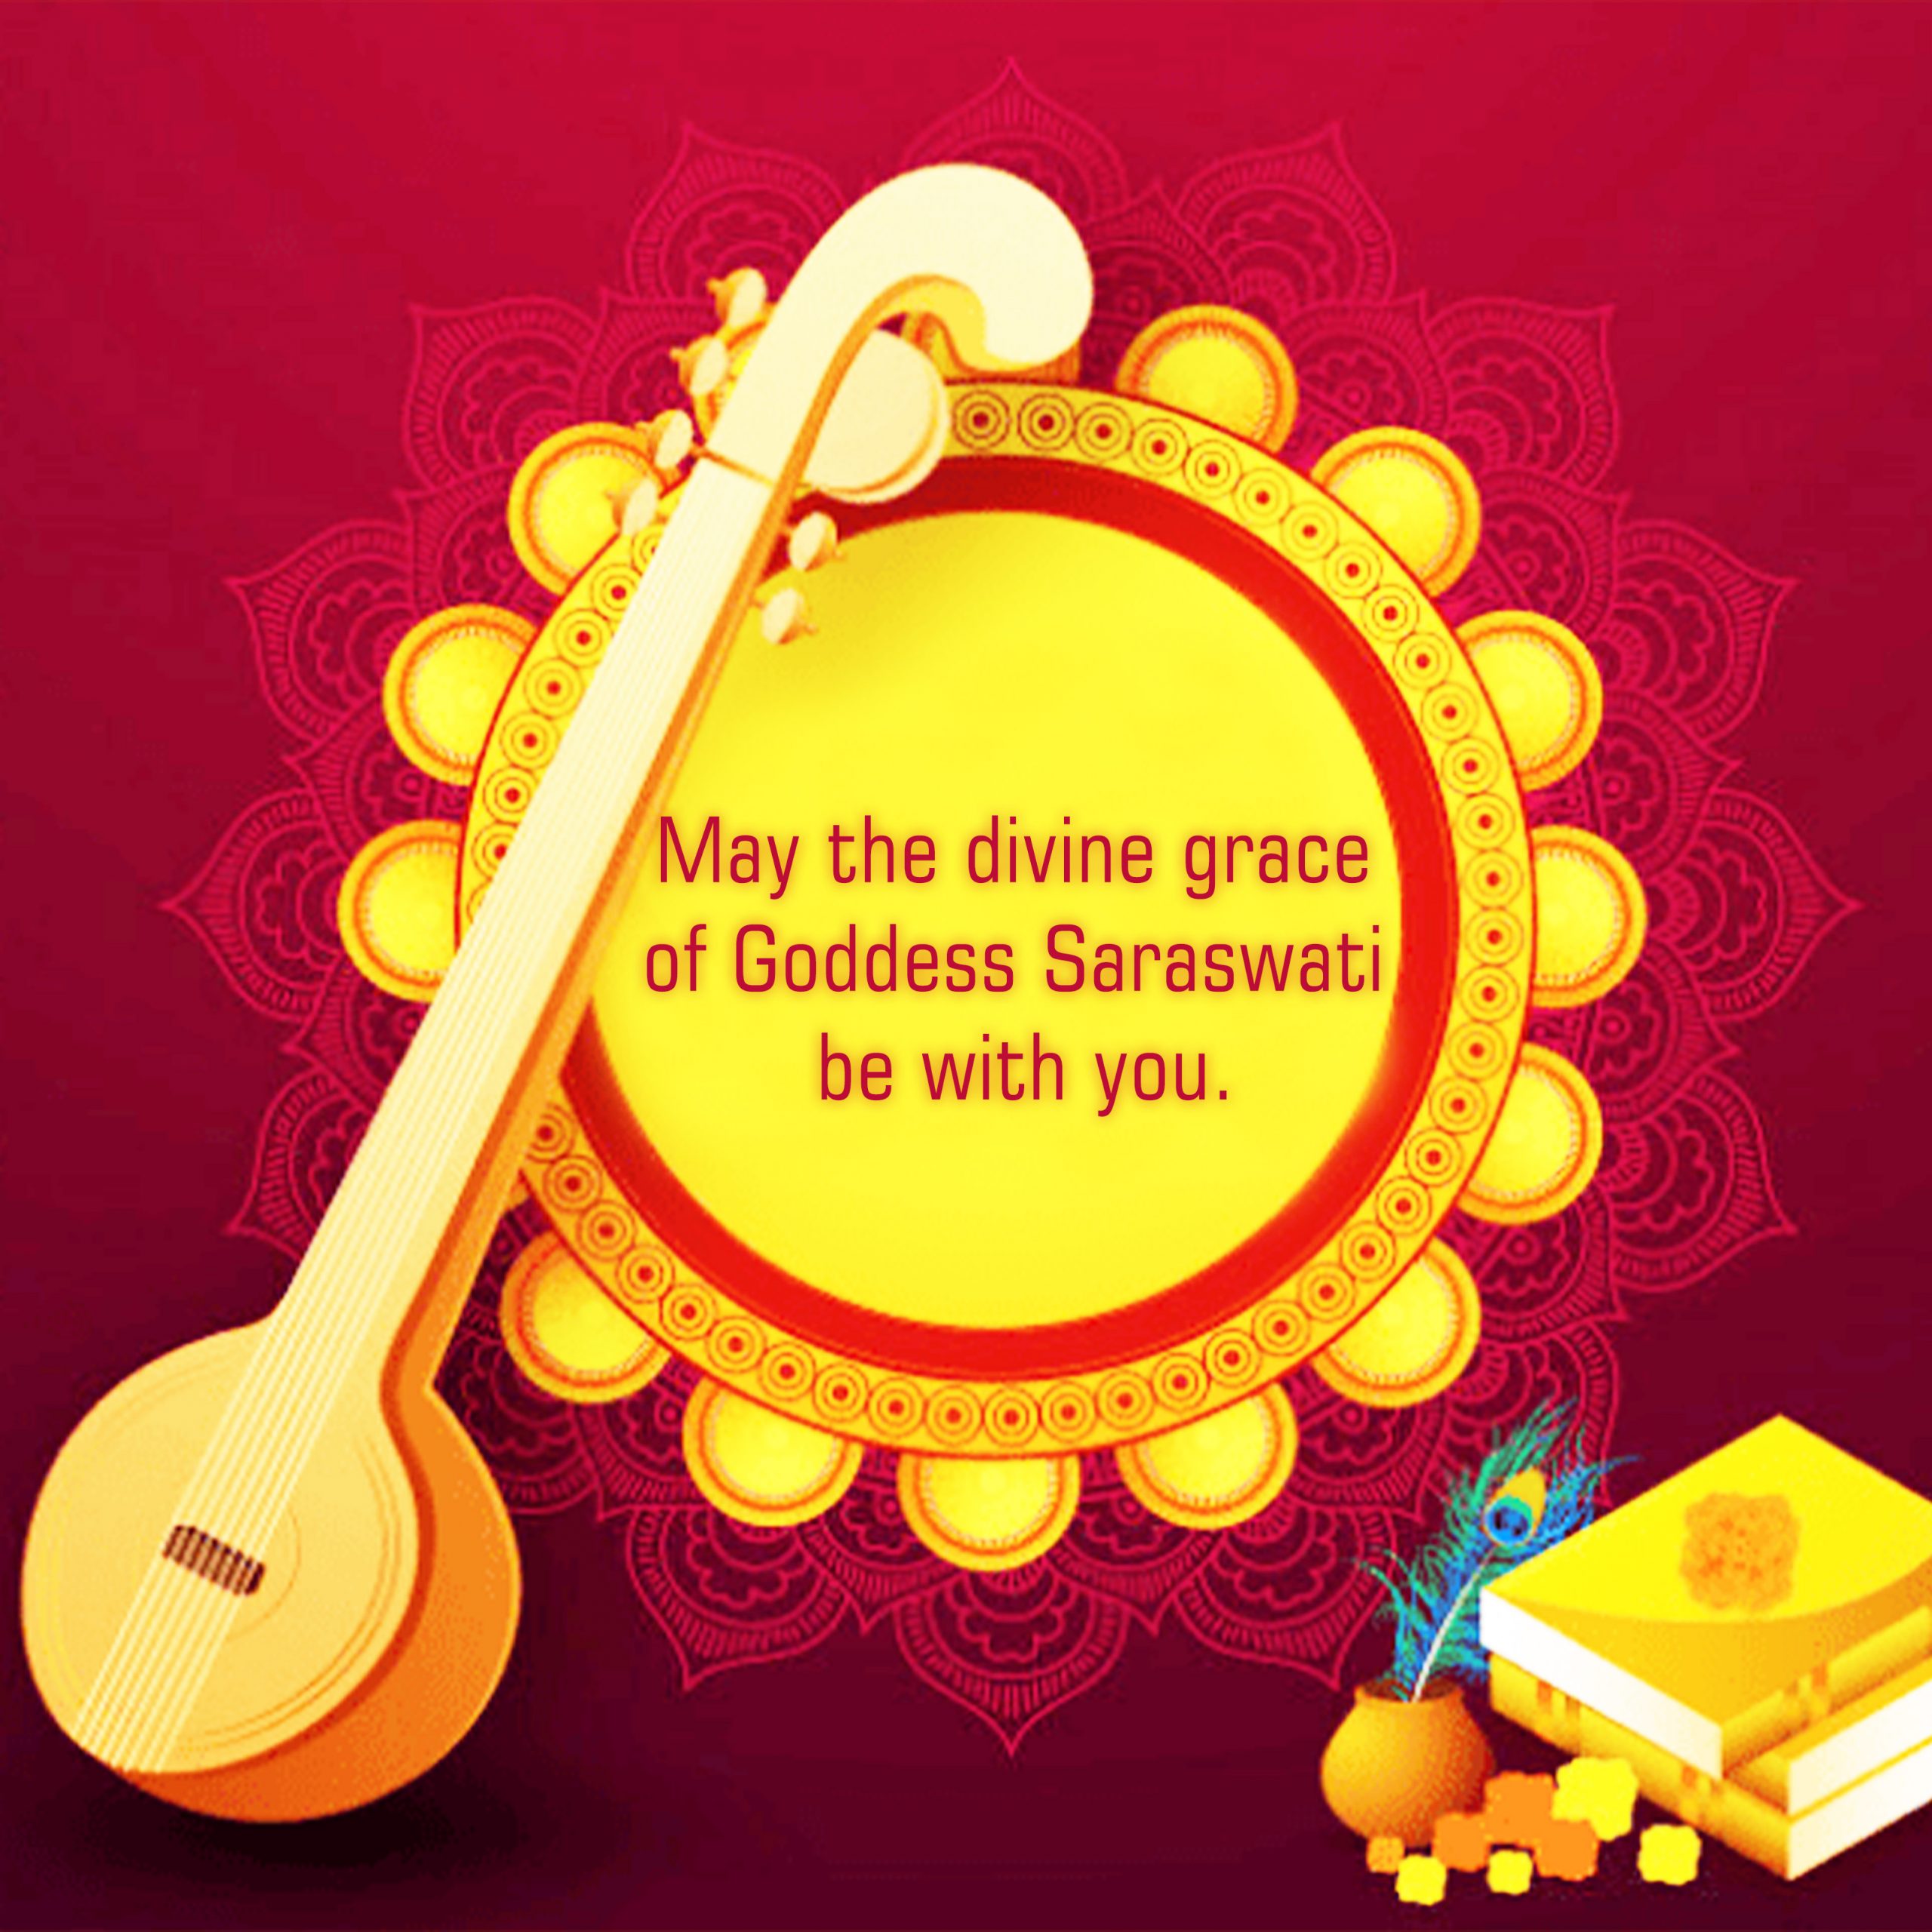 15+ Best wishes and messages for Basant Panchami